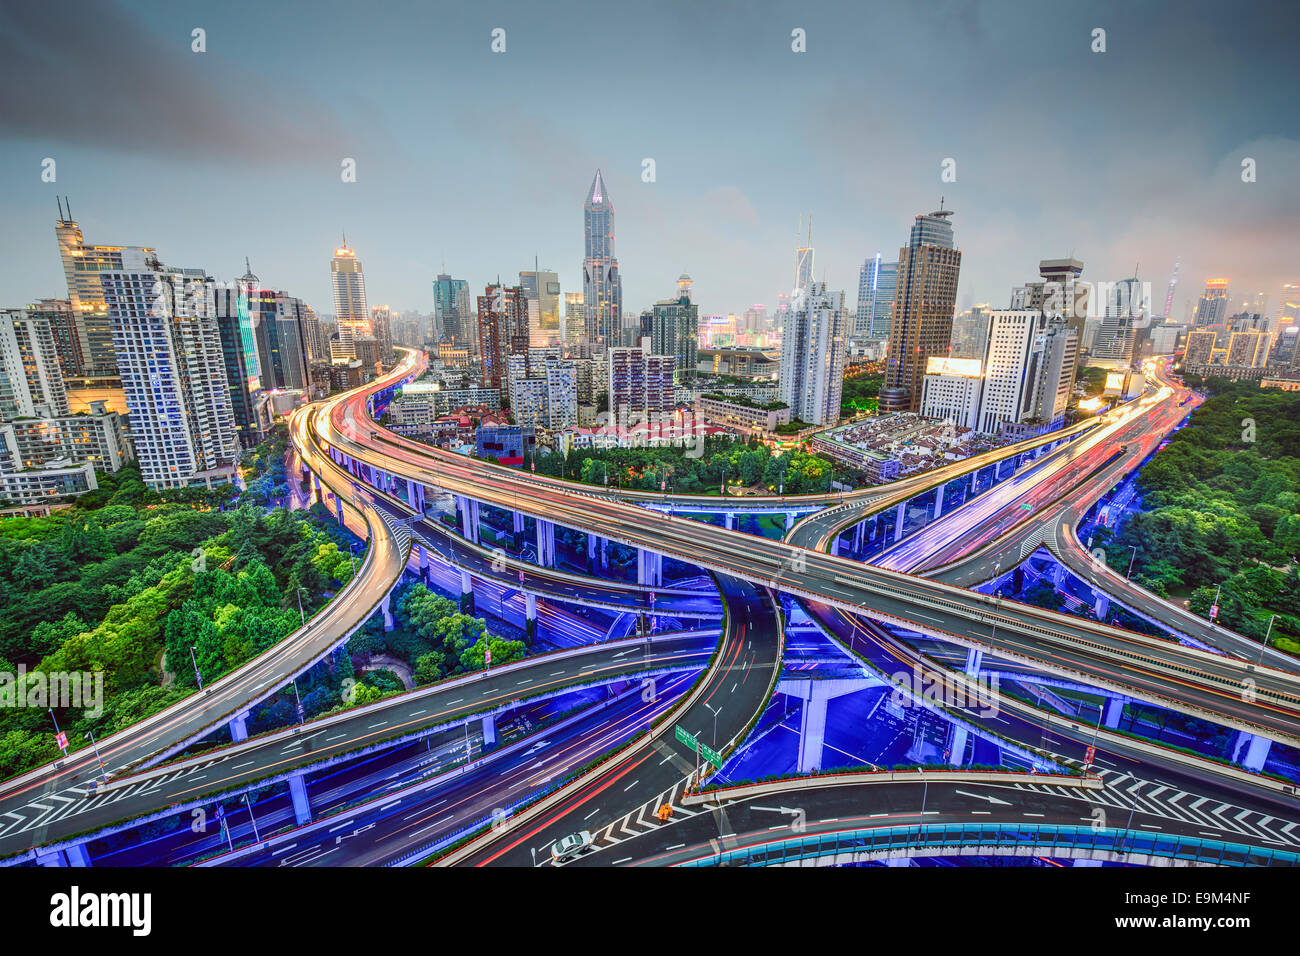 Shanghai, China cityscape obove highway junctions. Stock Photo